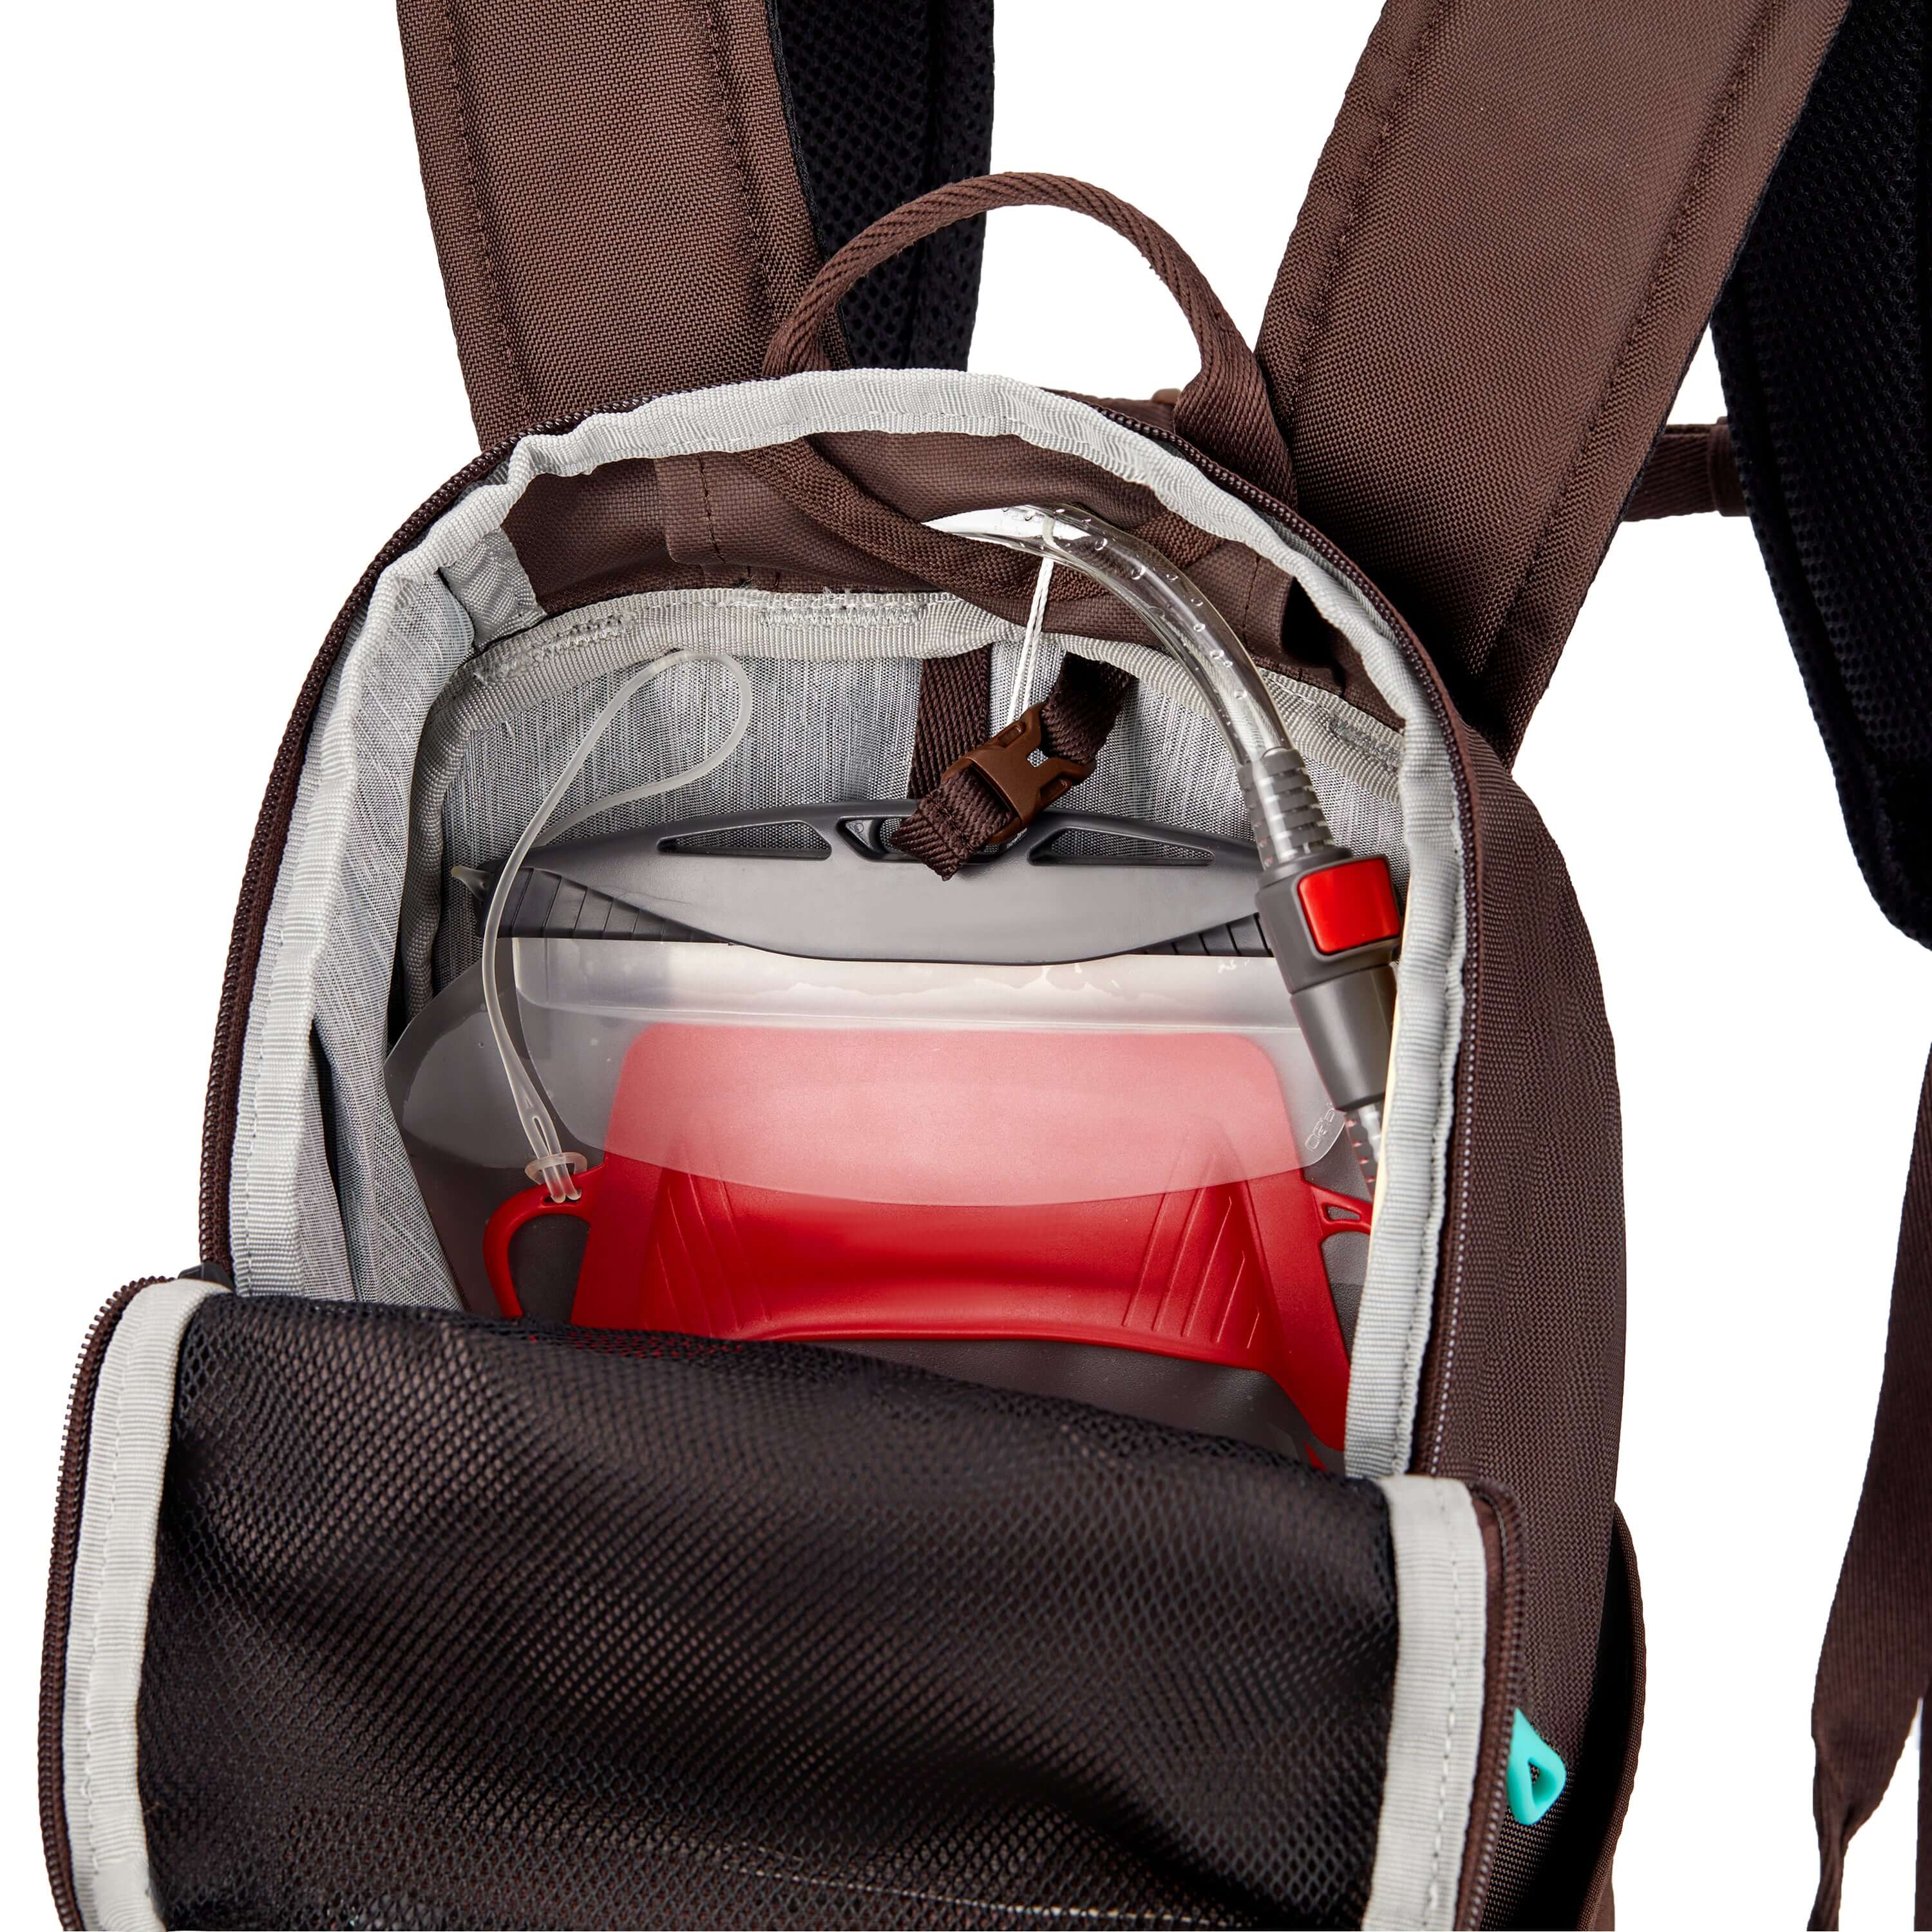 Inside view of Sherpani backpack, the Switch in Sundial. The main zipper compartment is open to reveal a light gray interior and an internal hydration reservoir sleeve. 